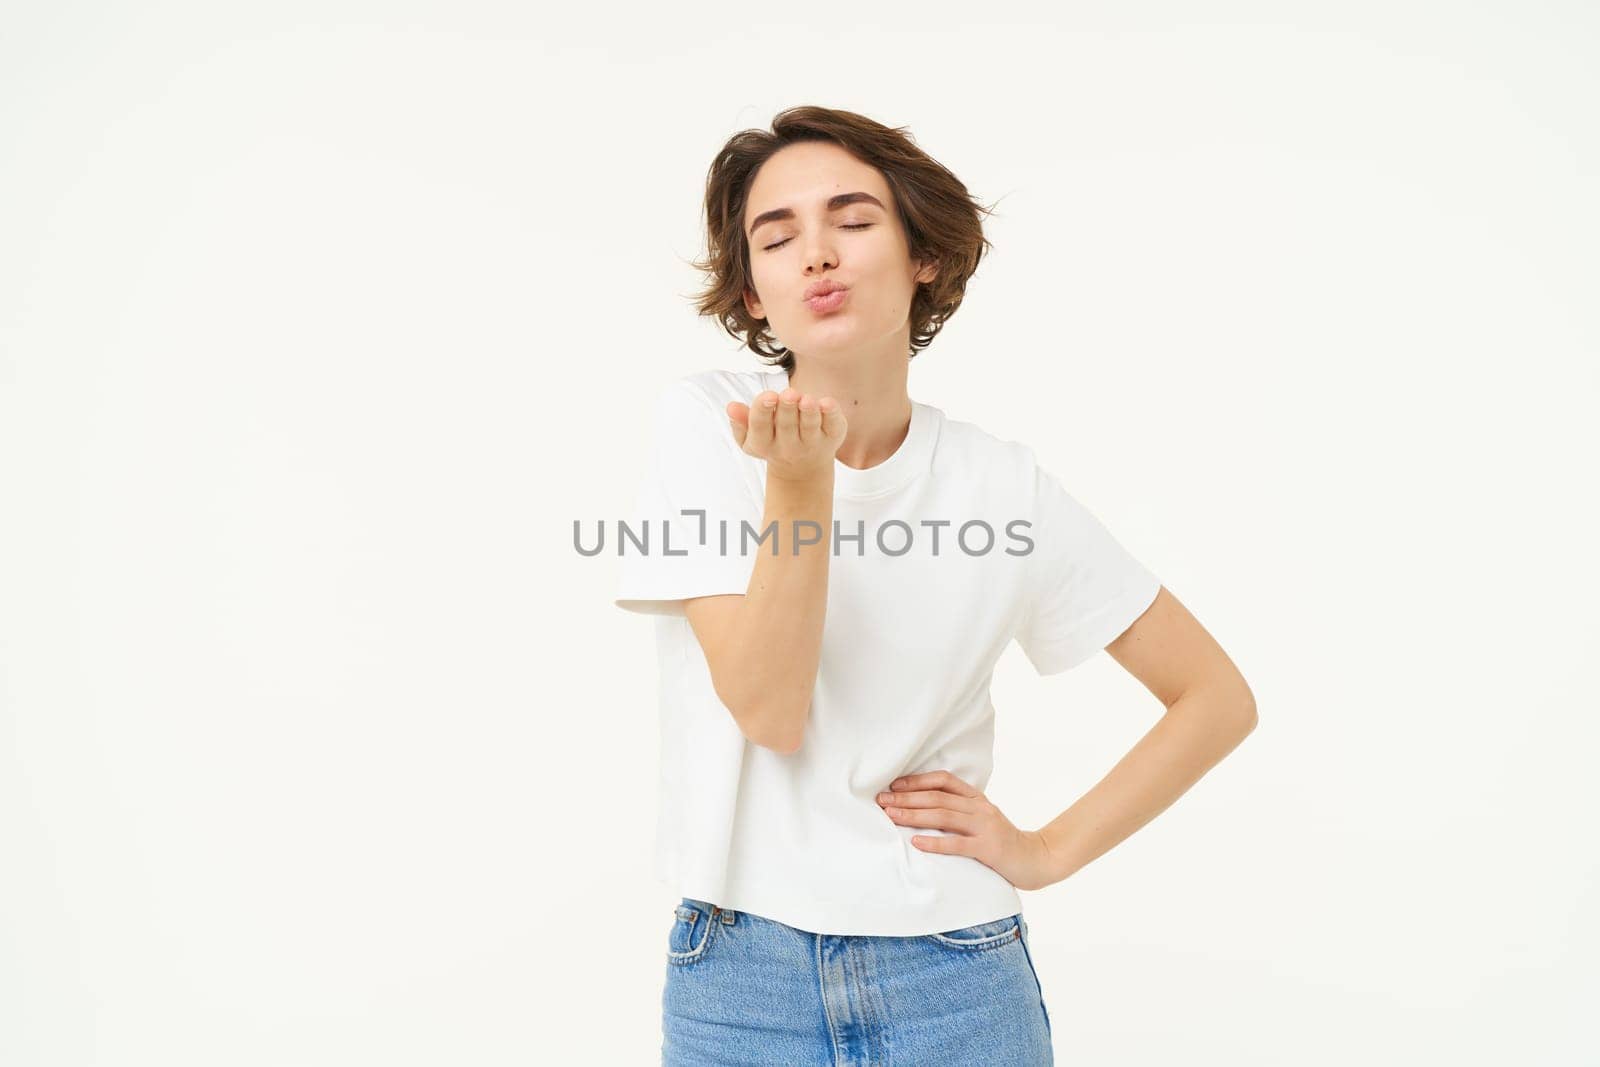 Portrait of young woman sending air kiss, blowing at camera and smiling, standing over white background.